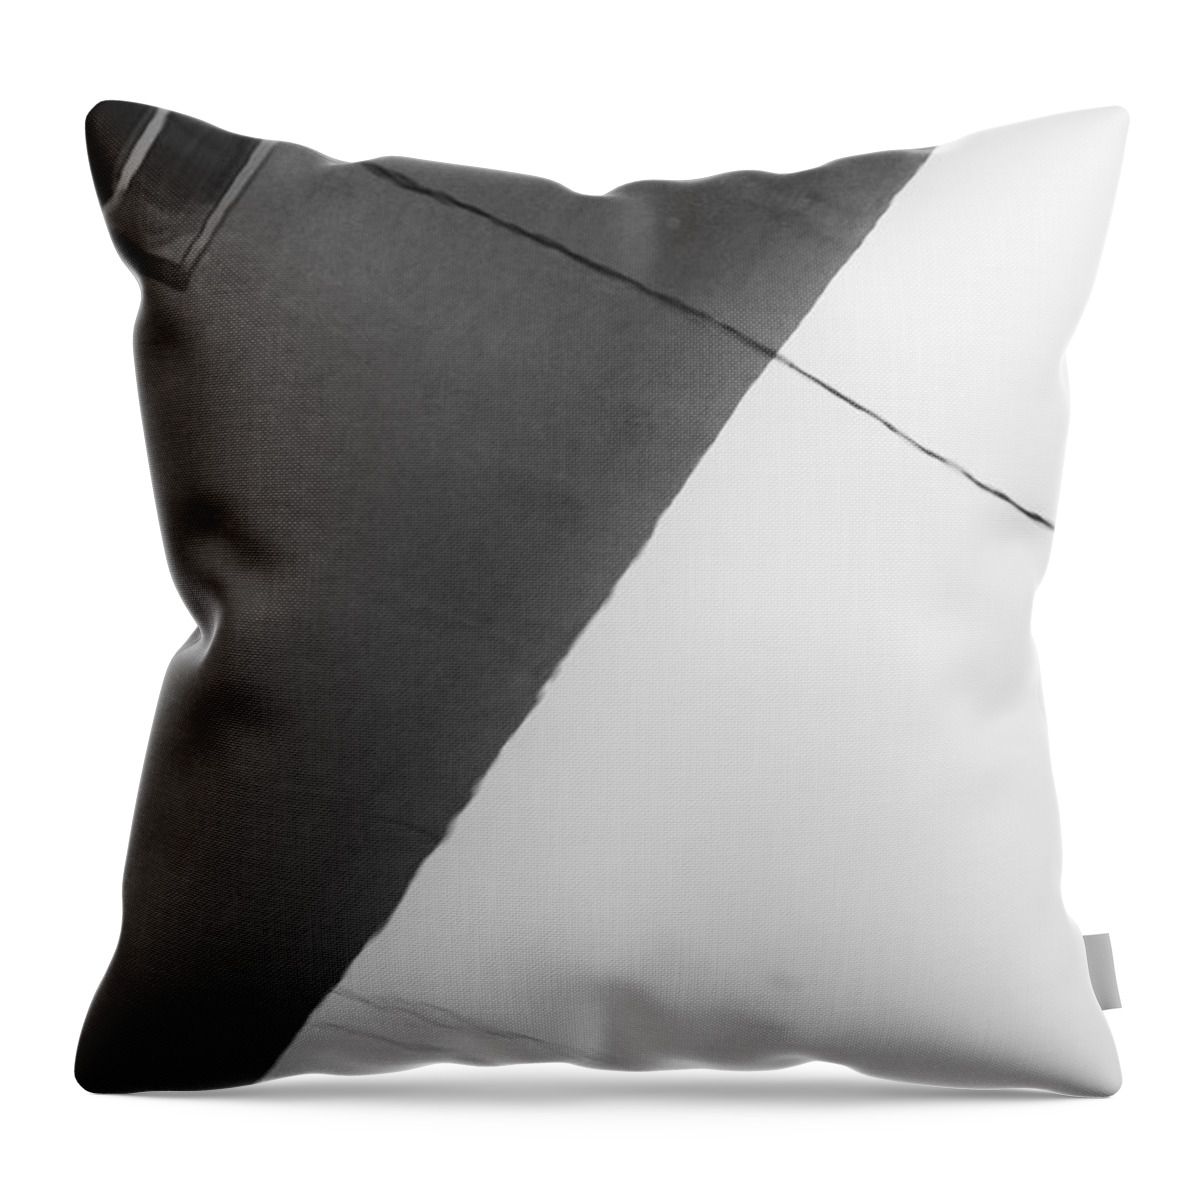 Monochrome Throw Pillow featuring the photograph Monochrome Building Abstract 1 by John Williams